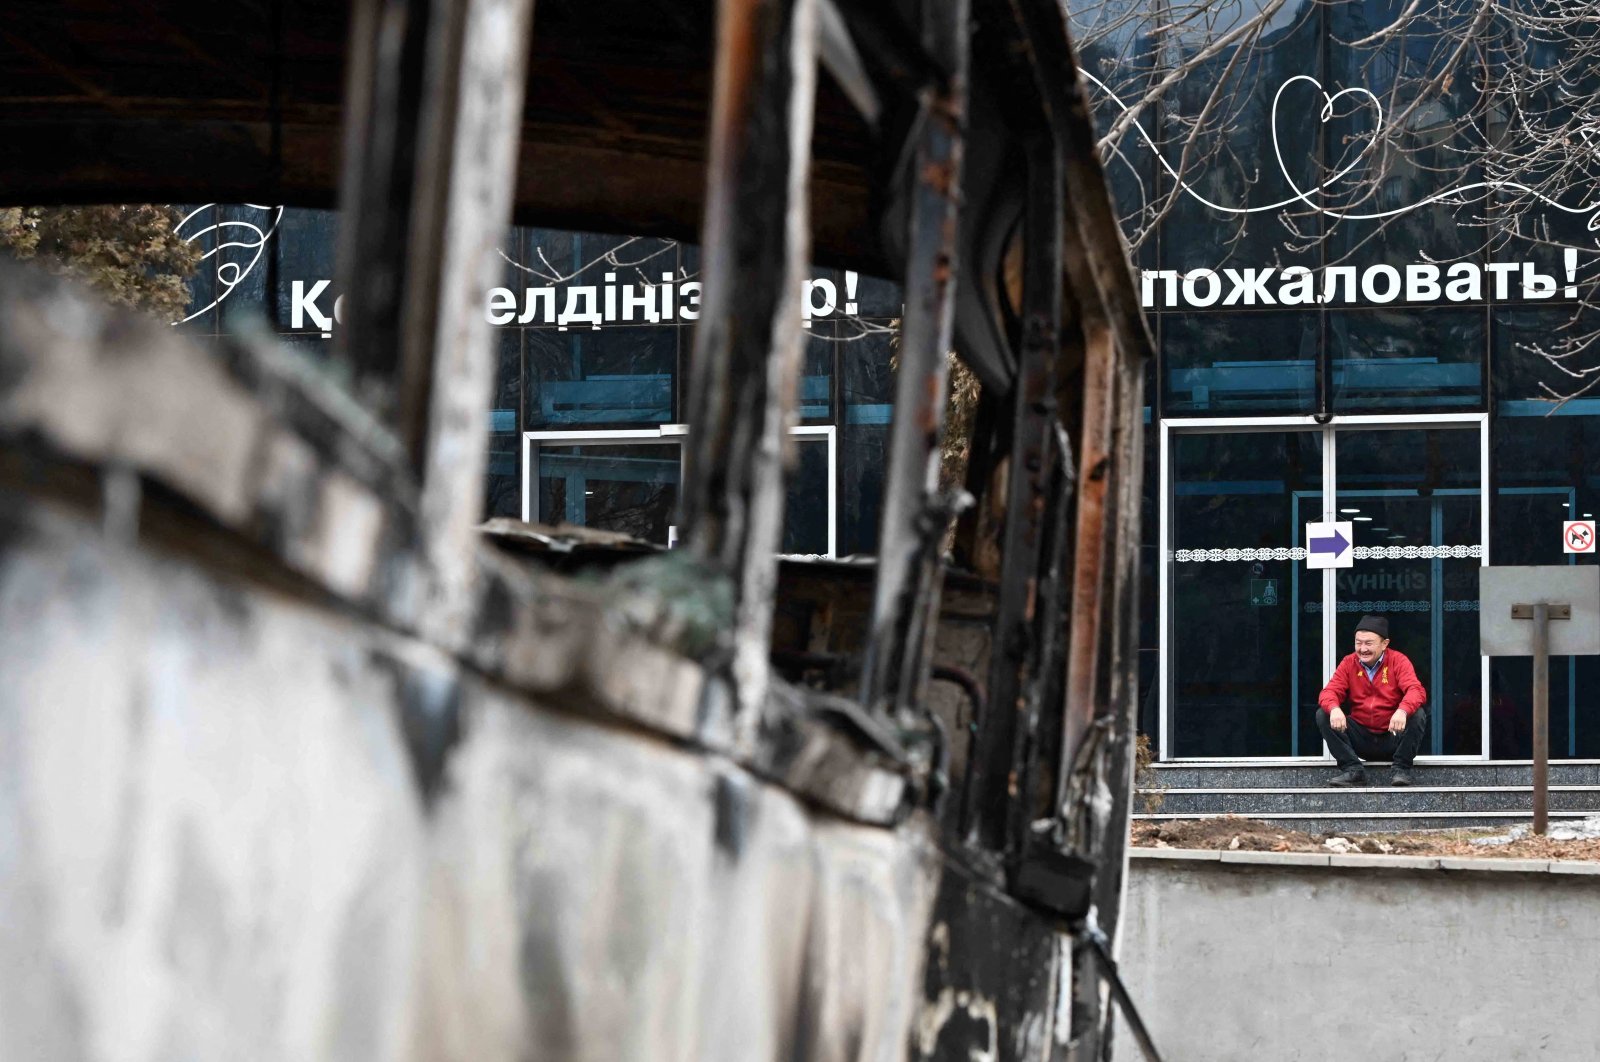 A man sits on the steps of a building as a vehicle, which was burnt during mass protests triggered by fuel price increase, is seen in the foreground, in Almaty, Kazakhstan, Jan. 9, 2022. (Reuters Photo)